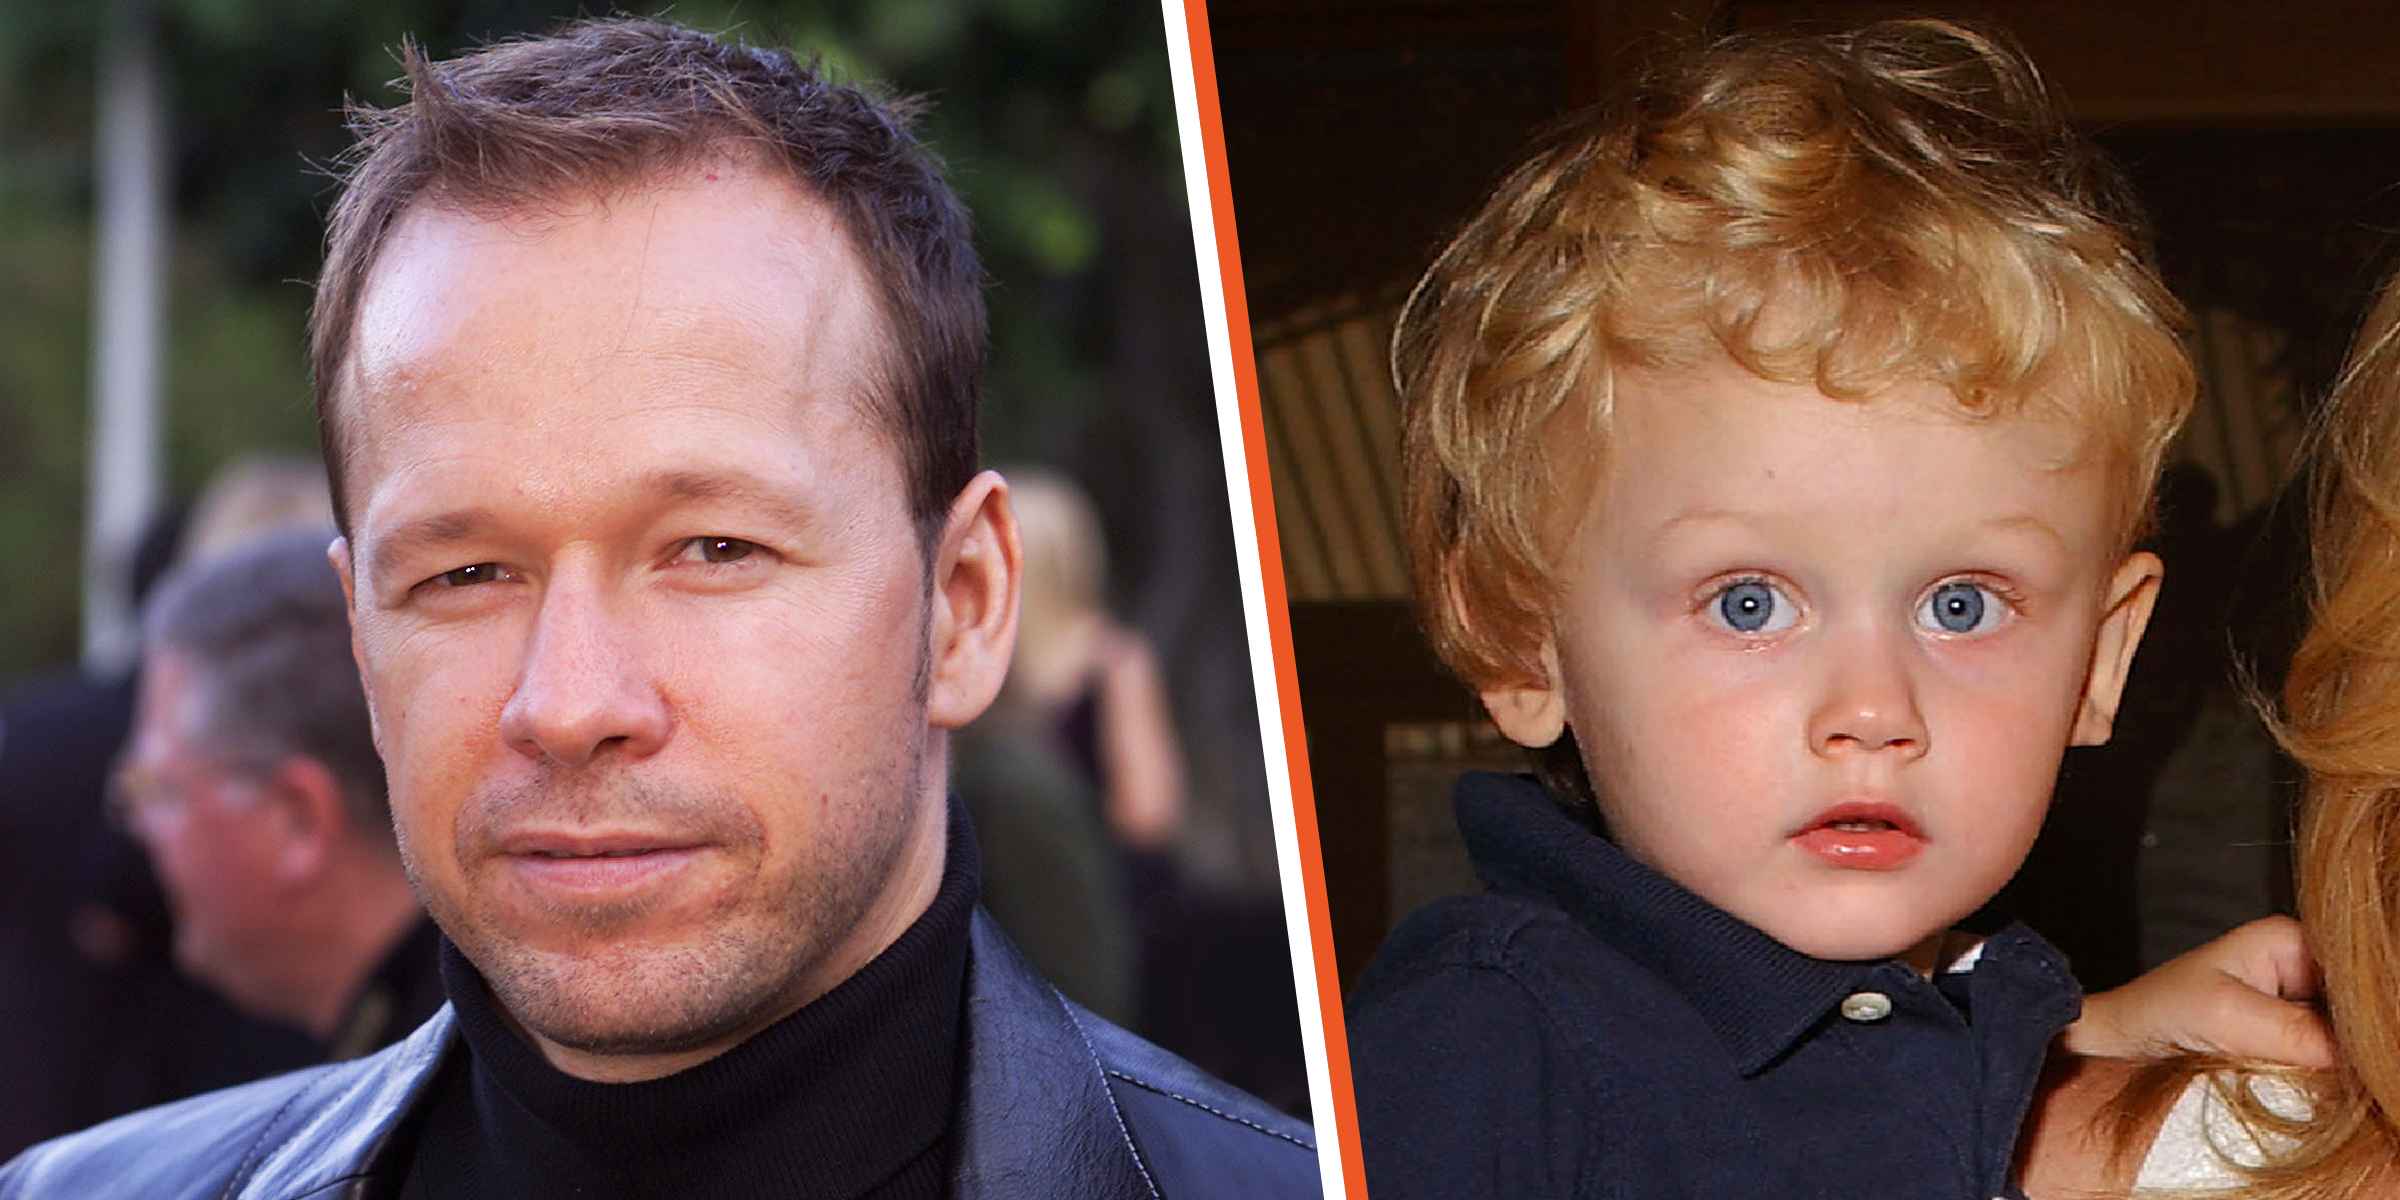 Donnie Wahlberg and Evan Asher | Sources: Getty Images | YouTube.com/CBSMornings